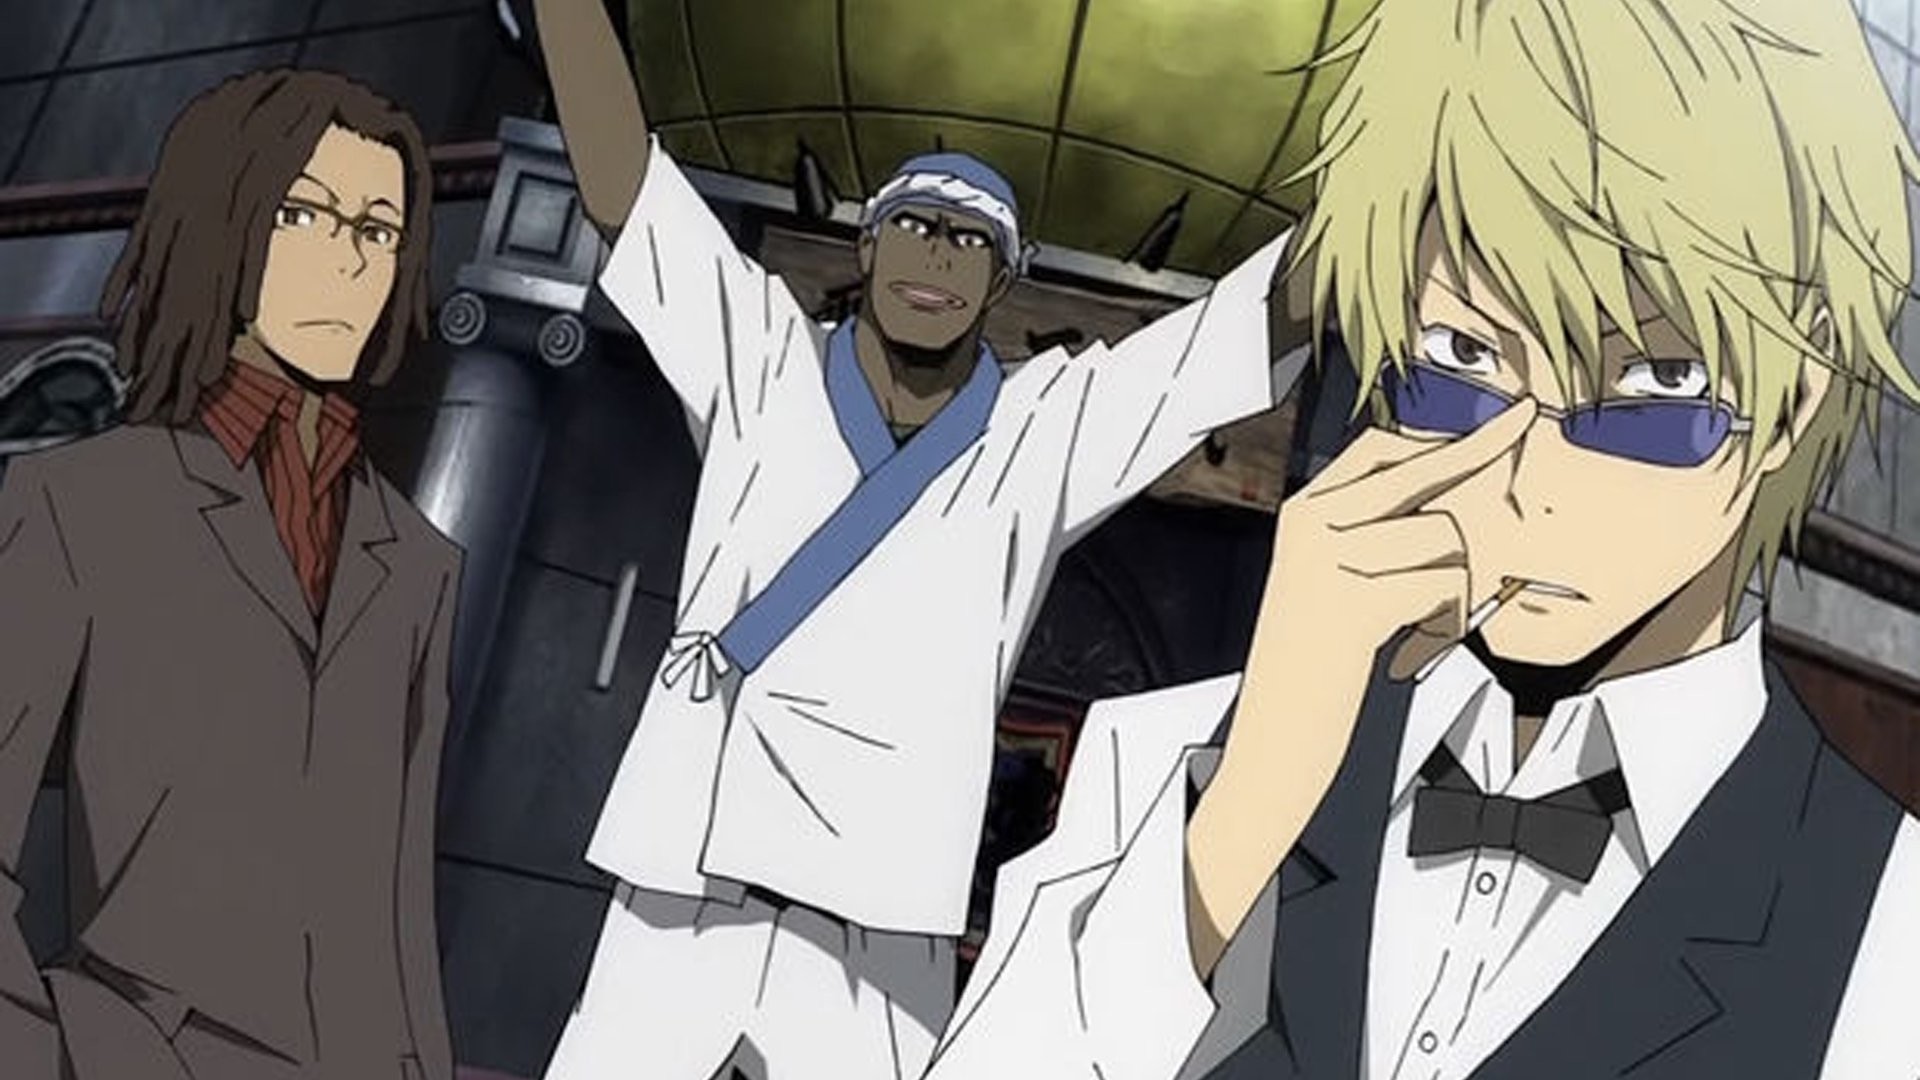 1920x1080 Nothing will top the first opening of Durarara!!